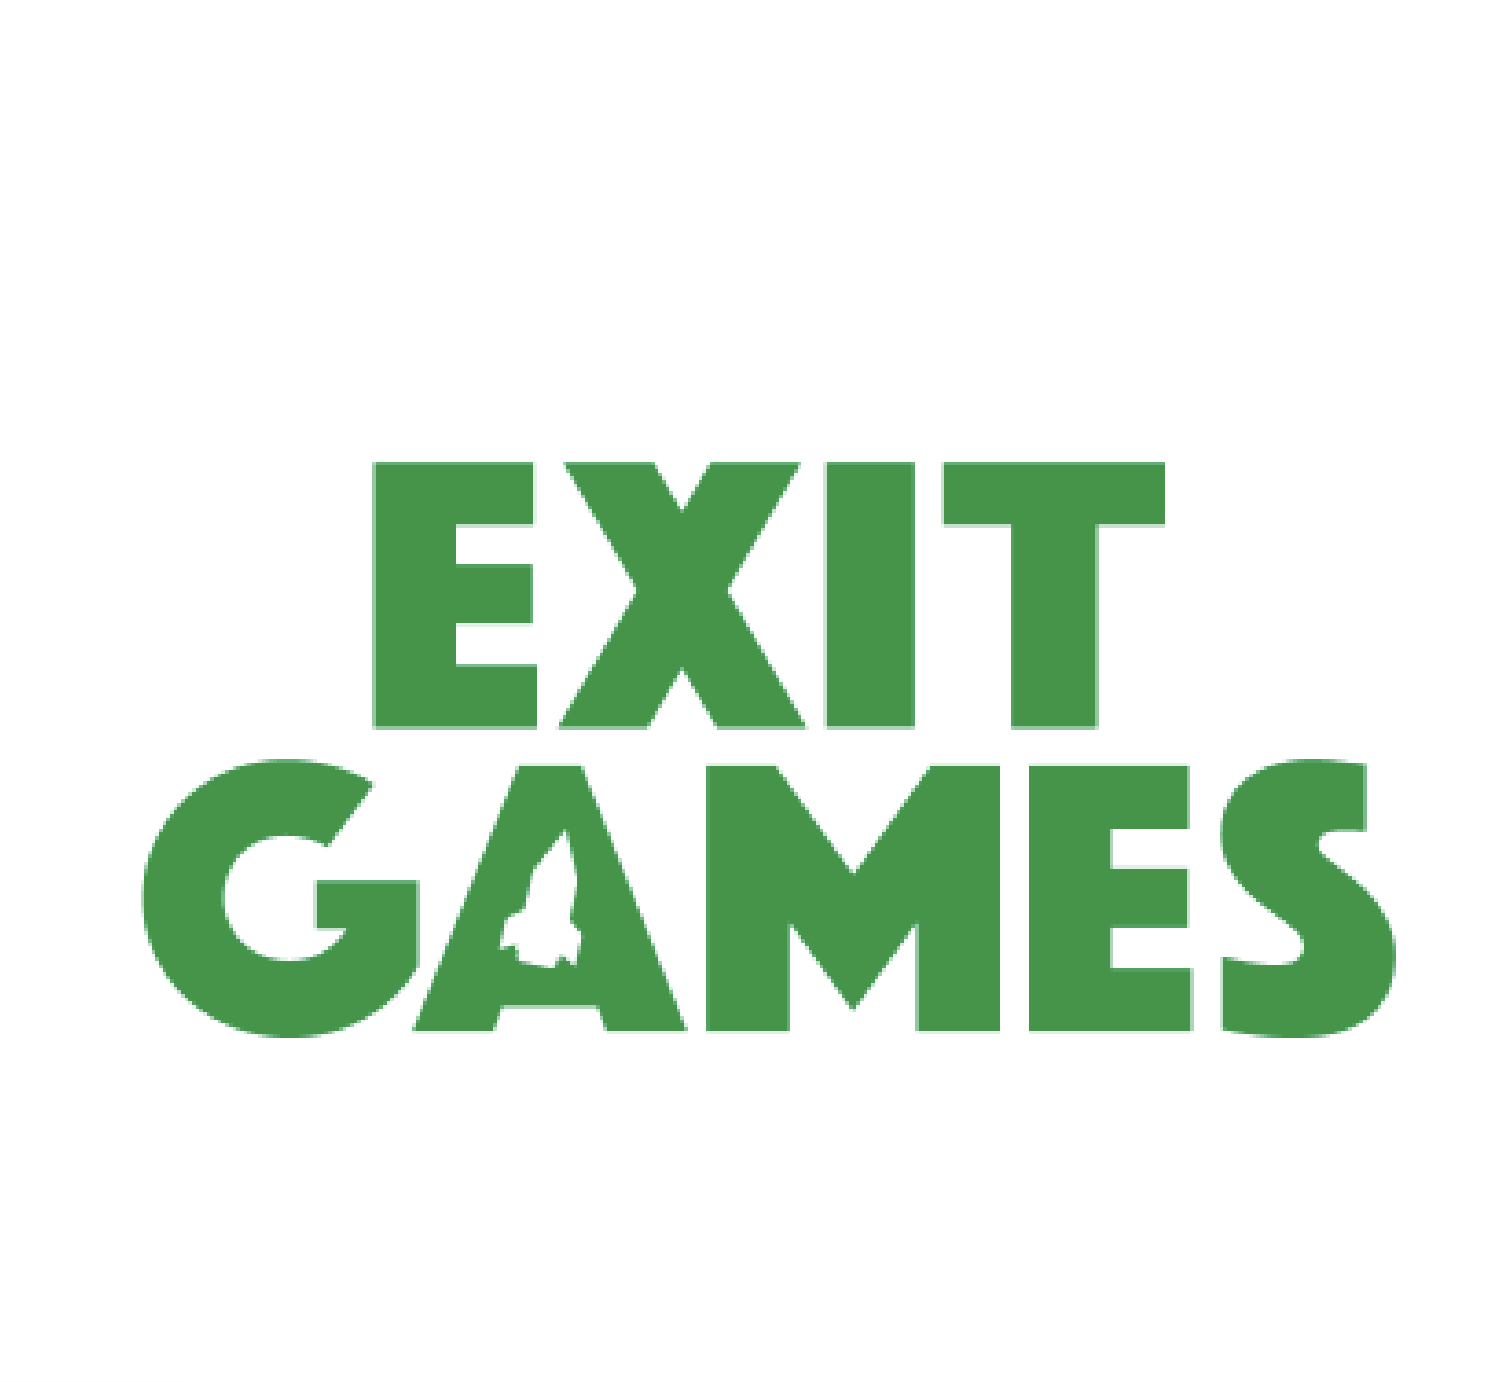 Exit 1 game